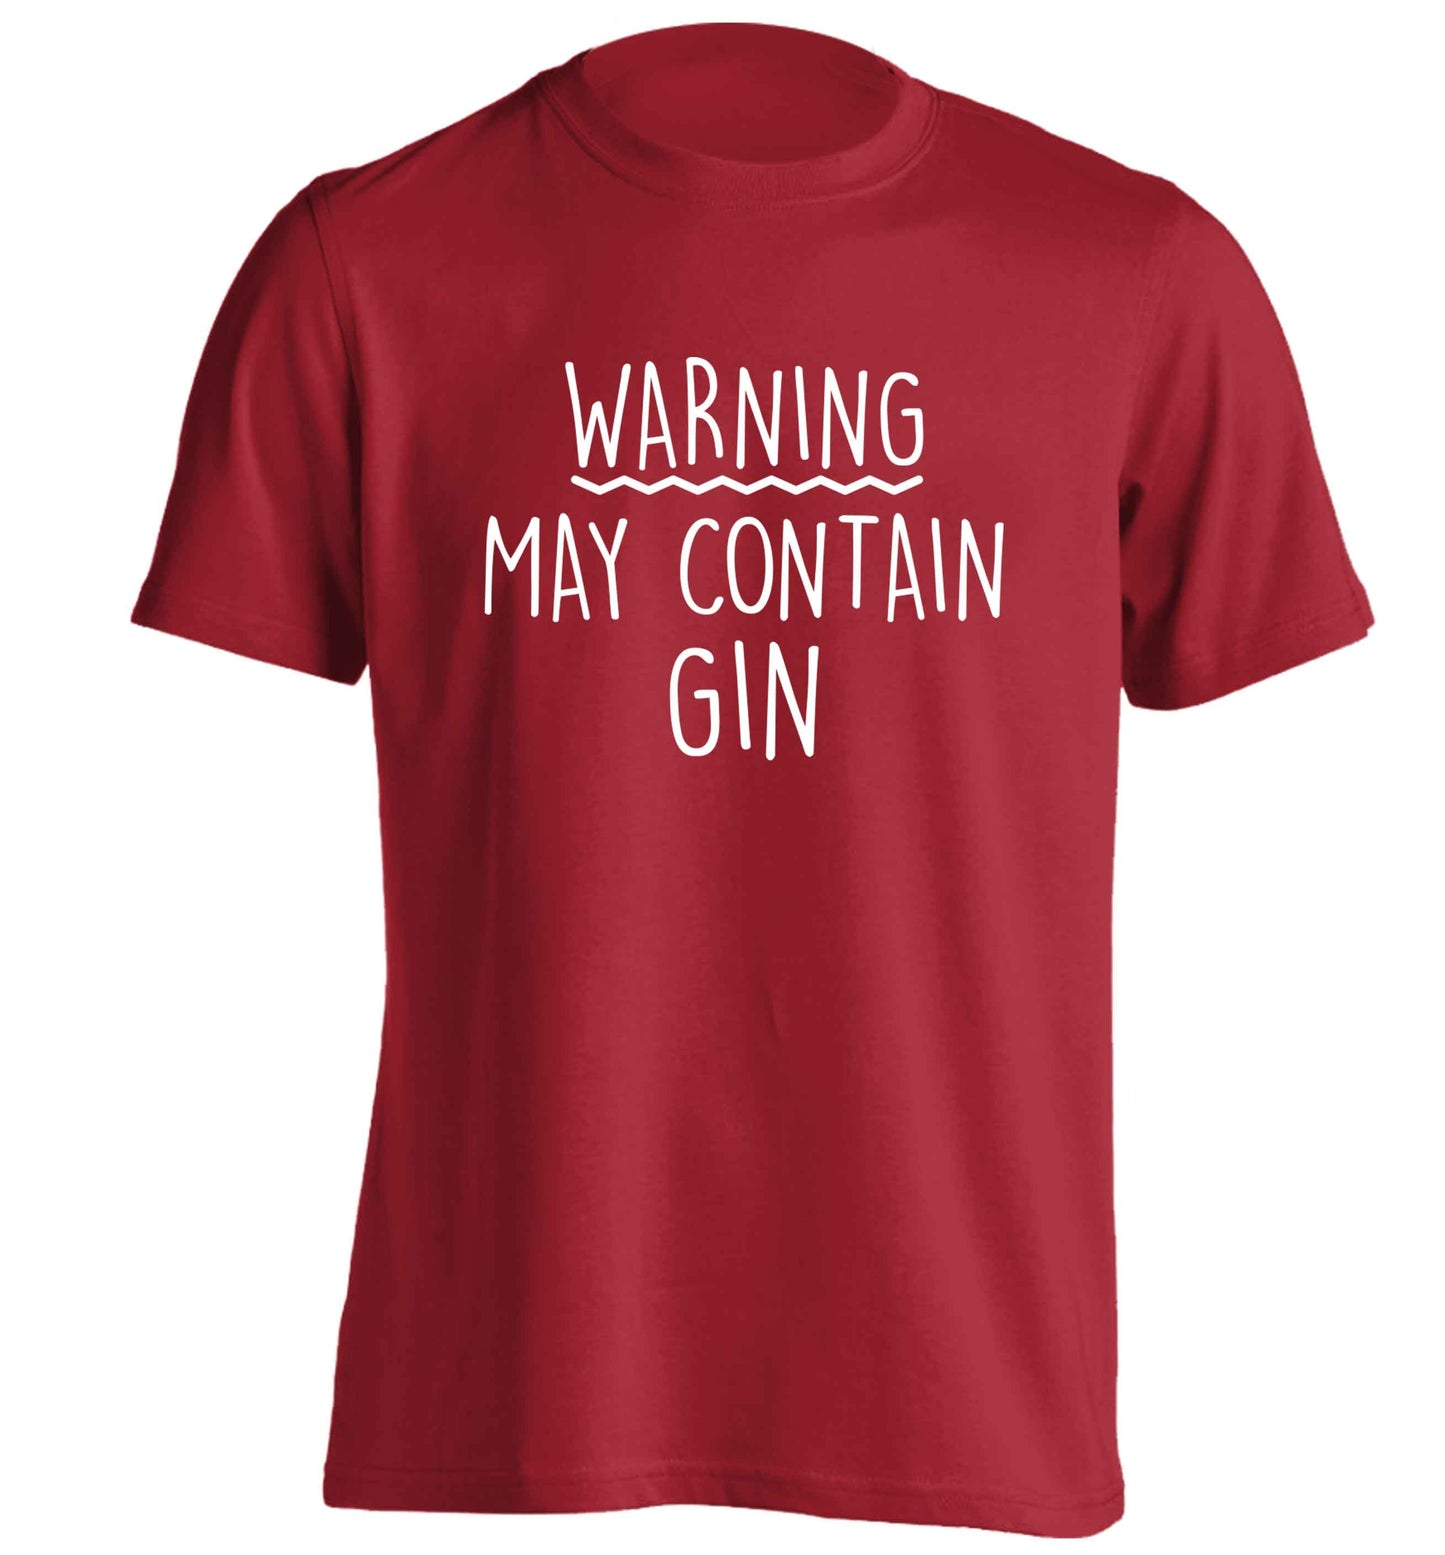 Warning may contain gin adults unisex red Tshirt 2XL